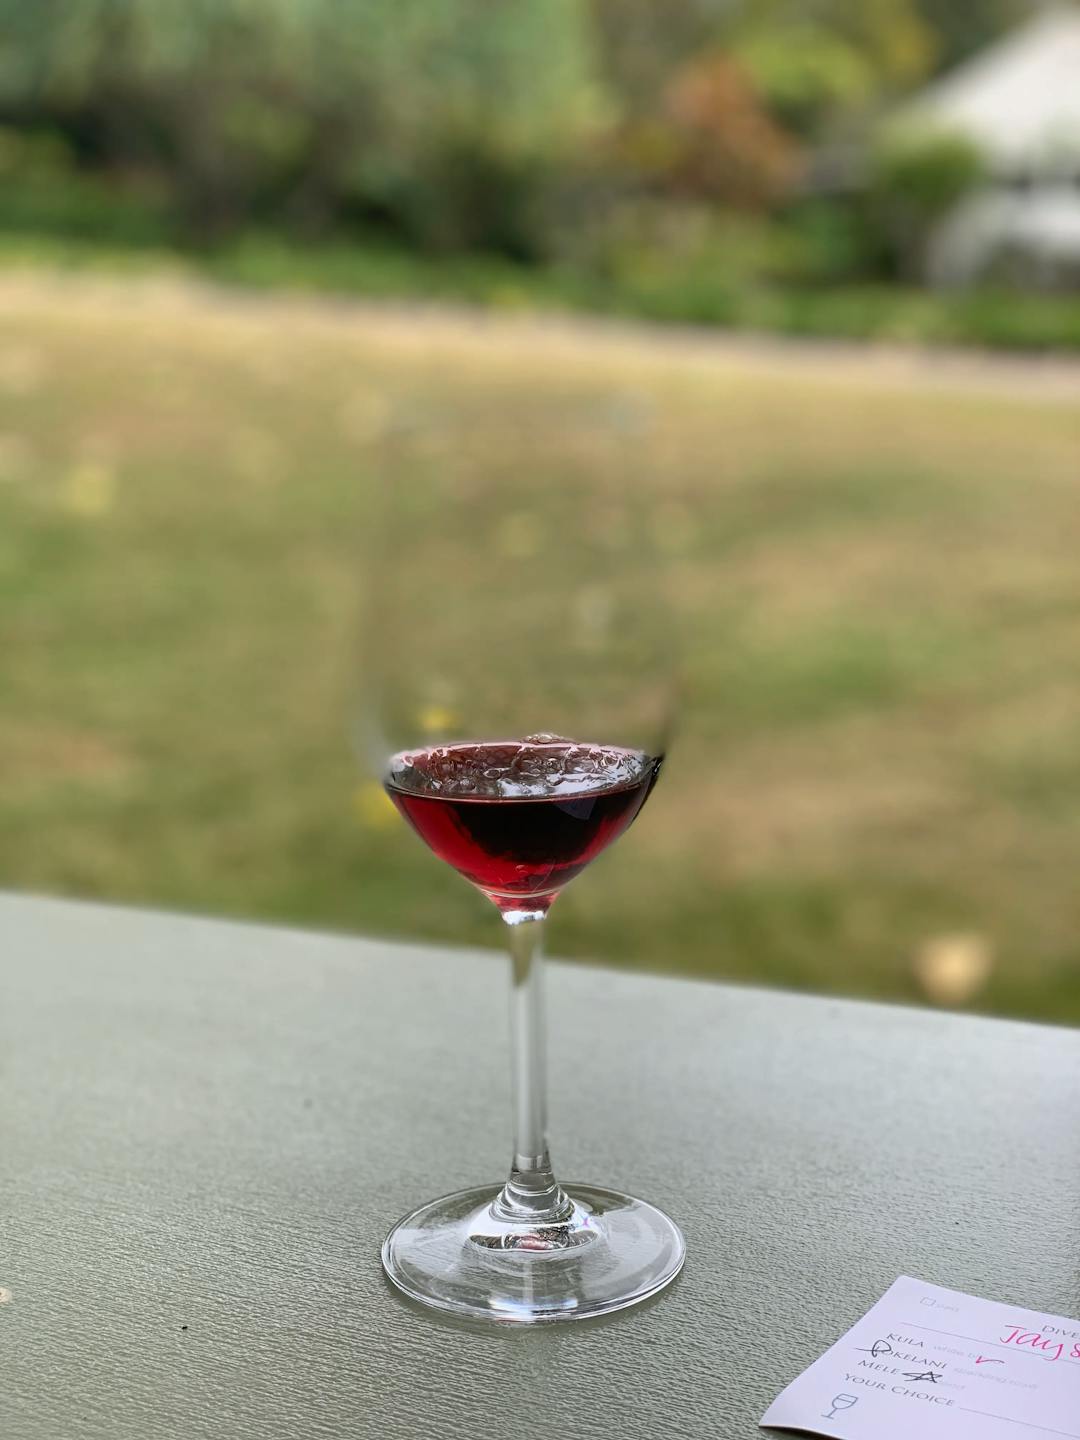 Shot of a glass of red wine, with a lawn in the background